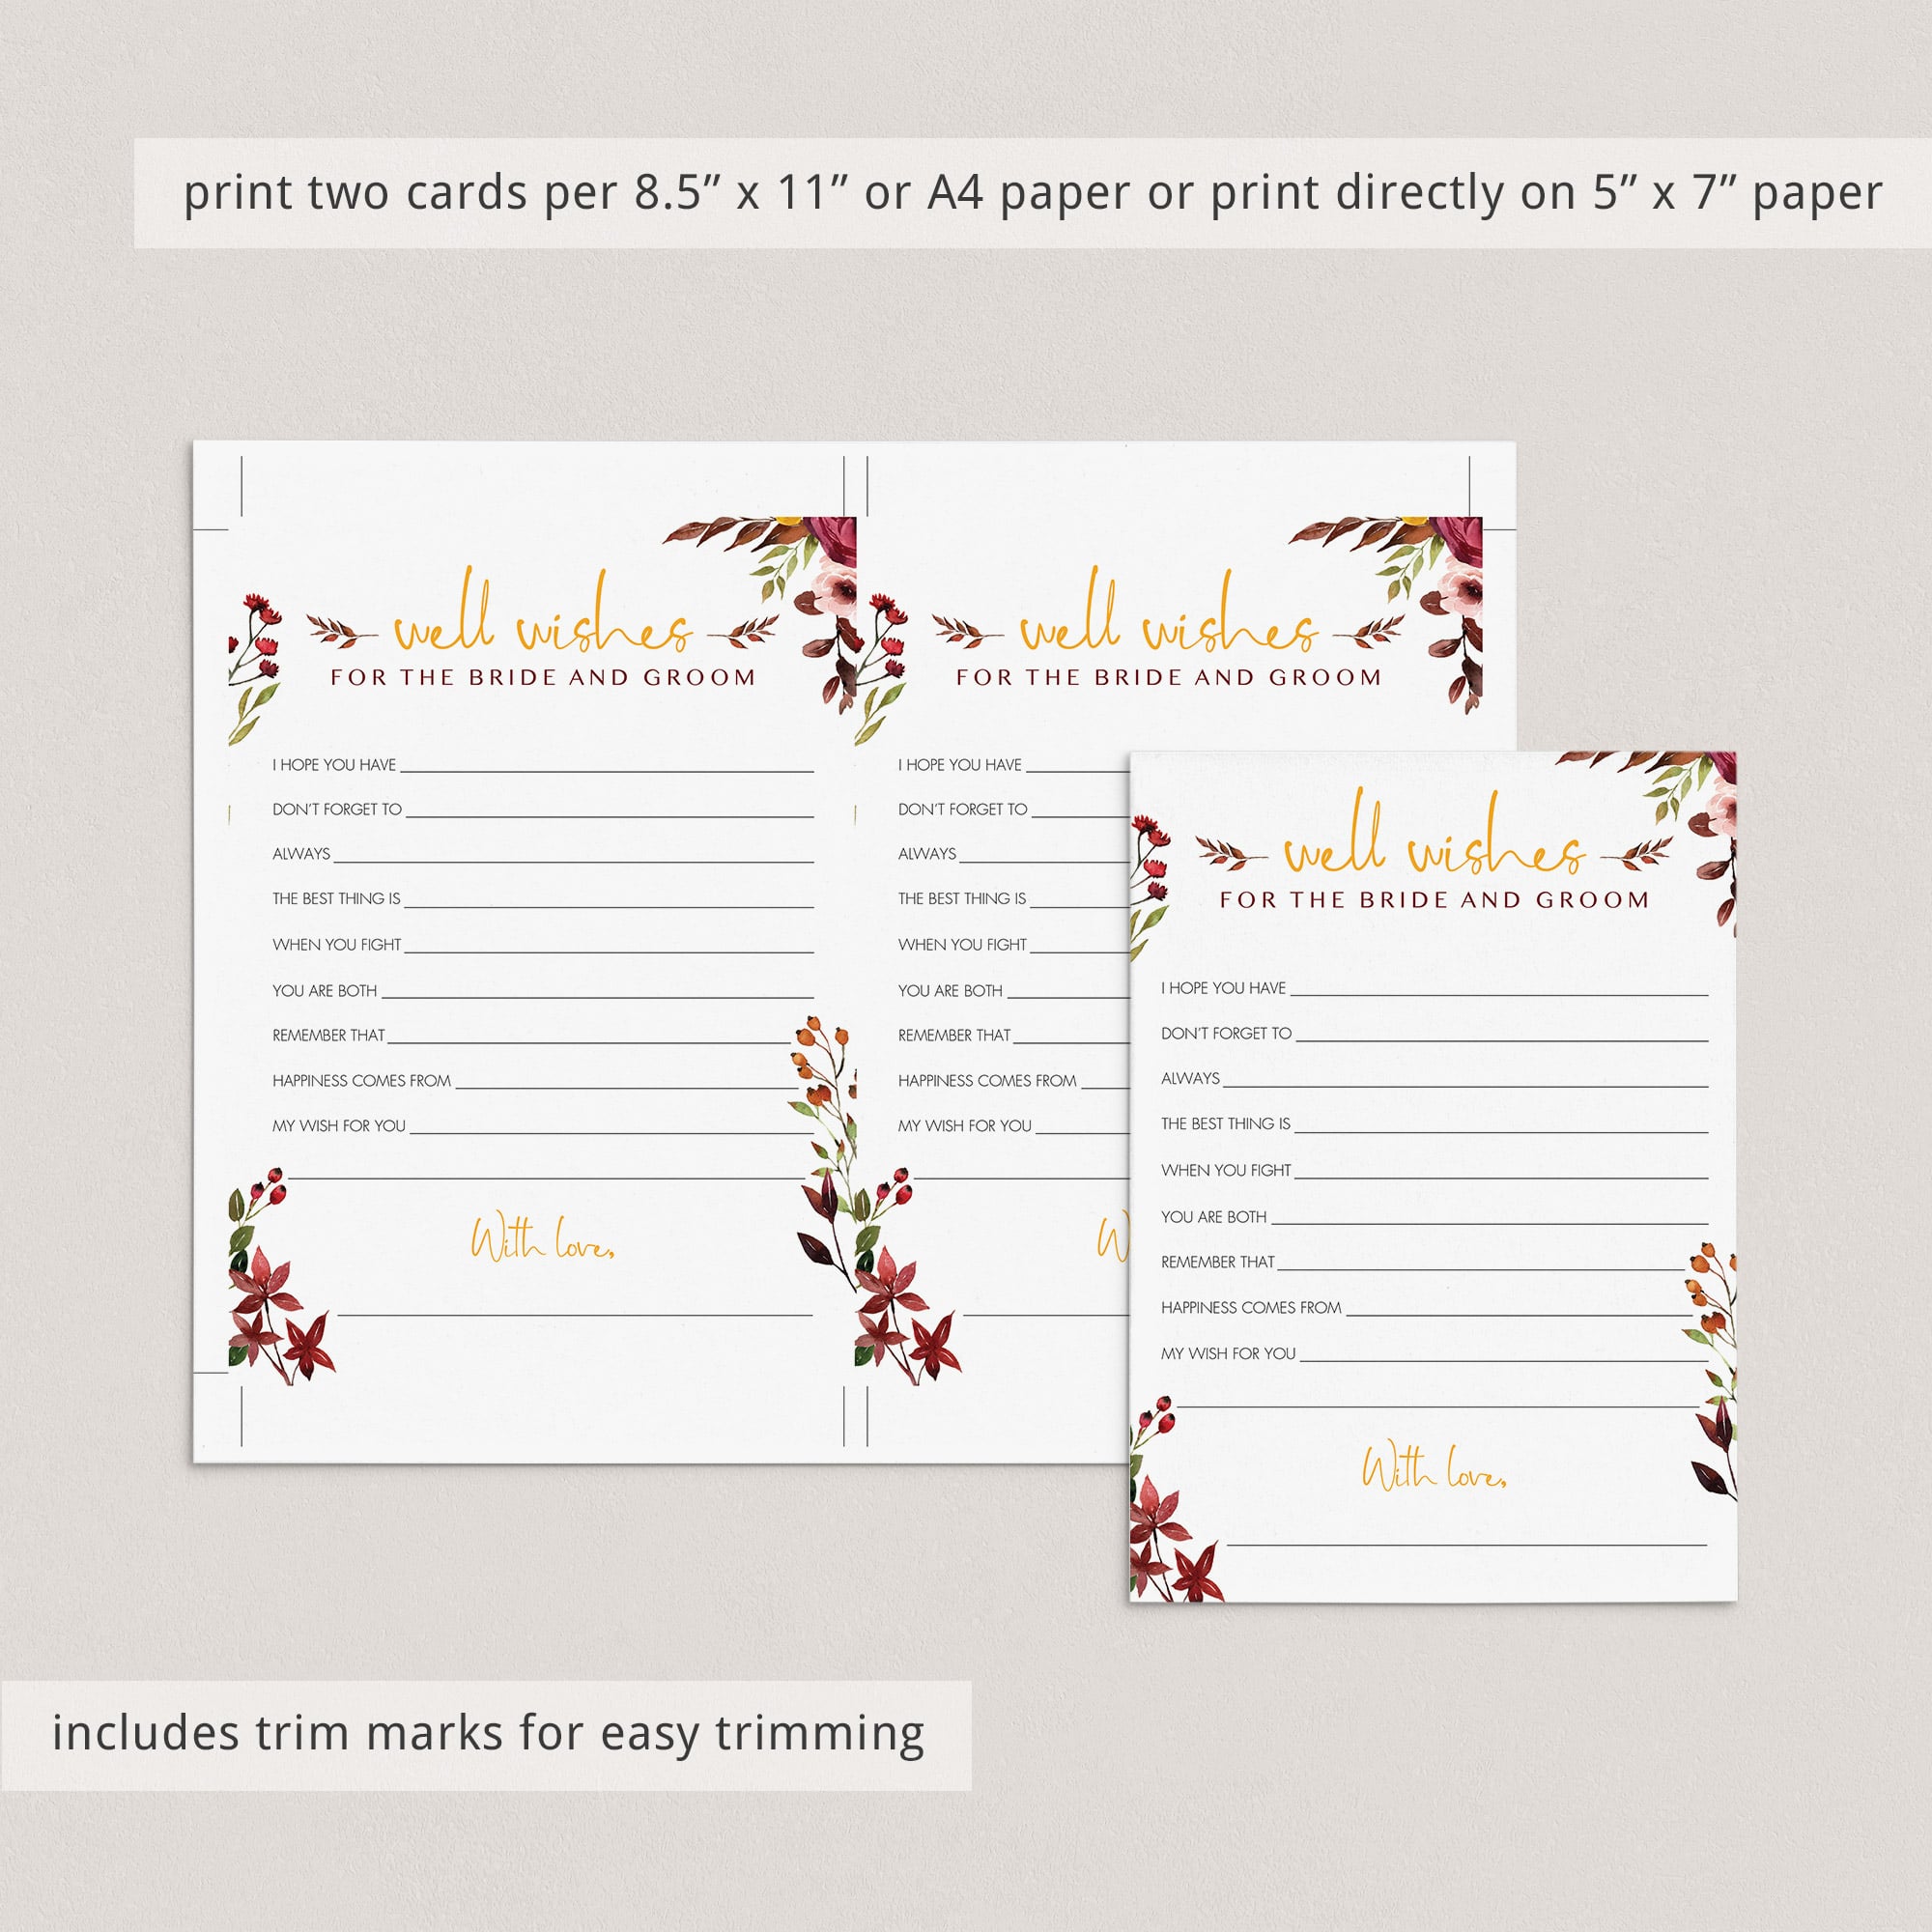 Autumn bridal shower wishes for the bride and groom card printable by LittleSizzle